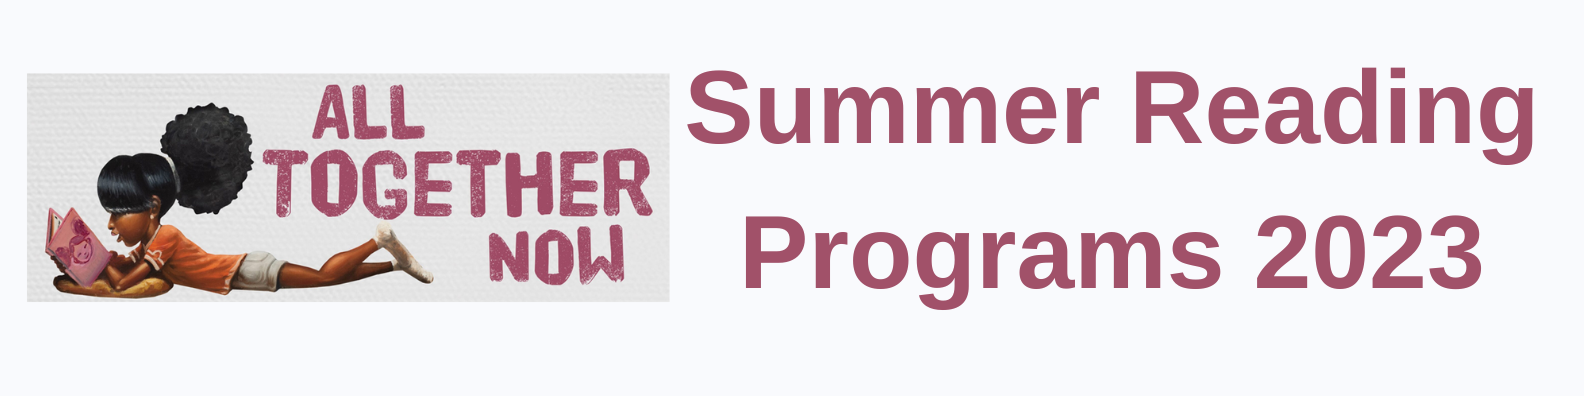 Click this image for summer reading programs